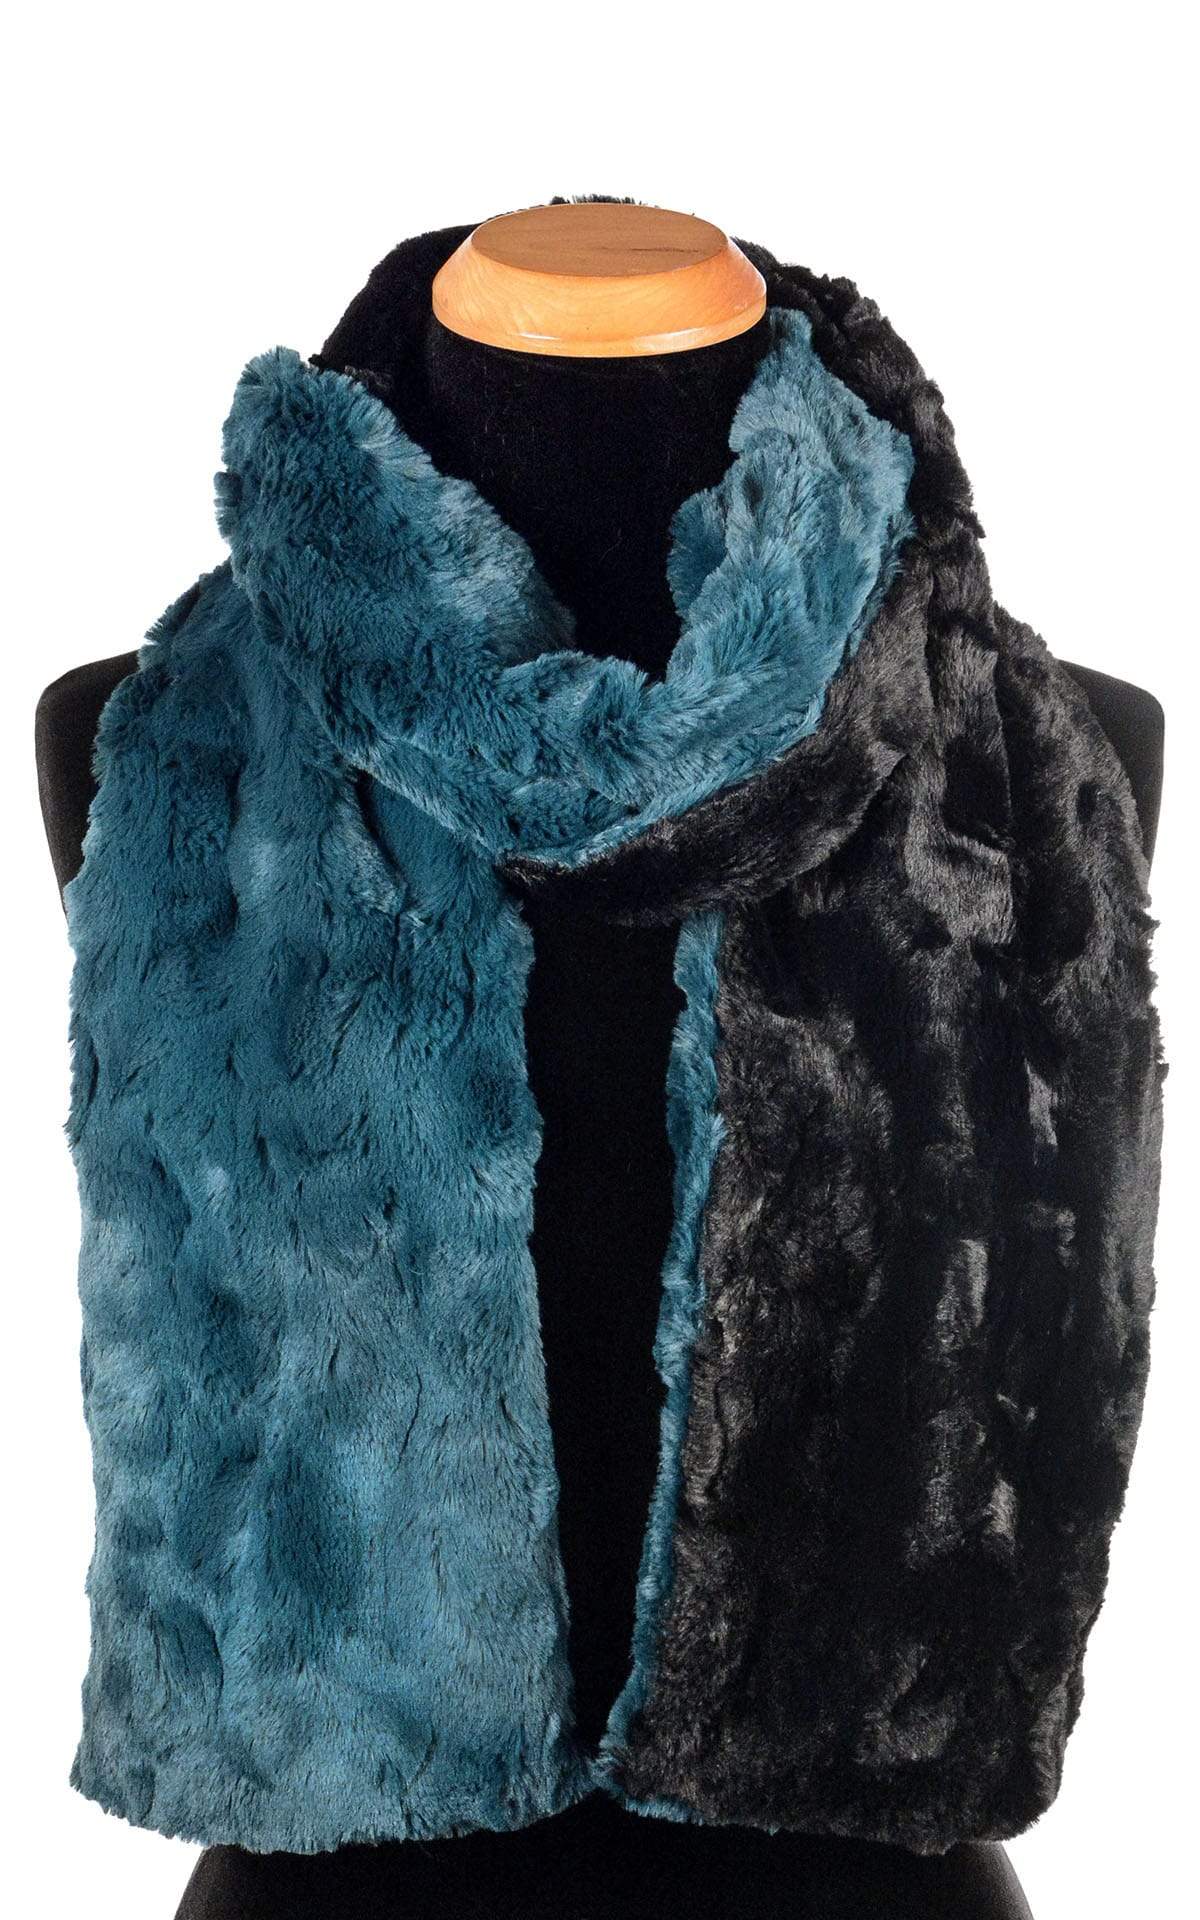 Women’s Product shot on mannequin of Two-tone Classic Scarf | Peacock Pond blue/teal Faux Fur with cuddly black | Handmade by Pandemonium Millinery Seattle, WA USA